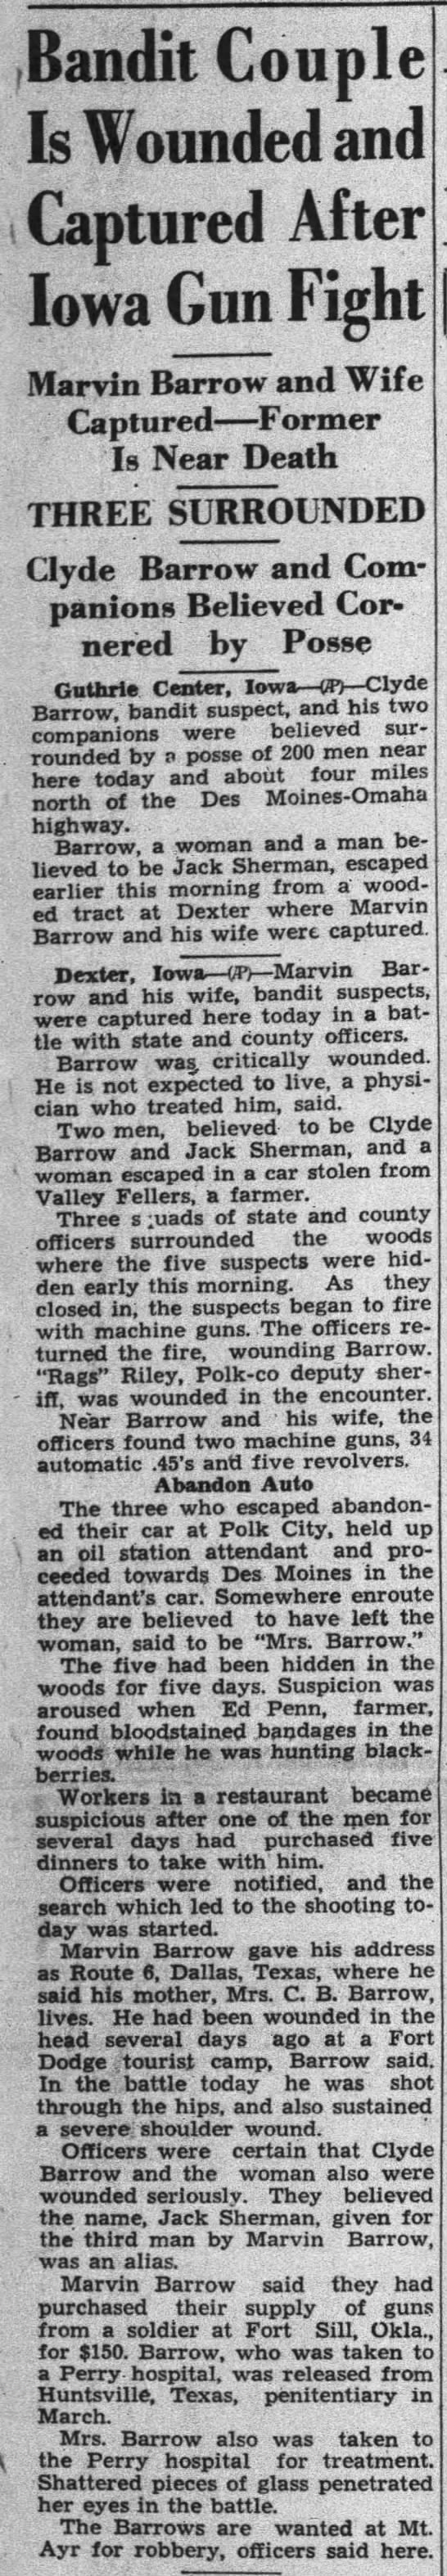 Clyde Barrow and companions cornered by posse in Iowa in July 1933 - 